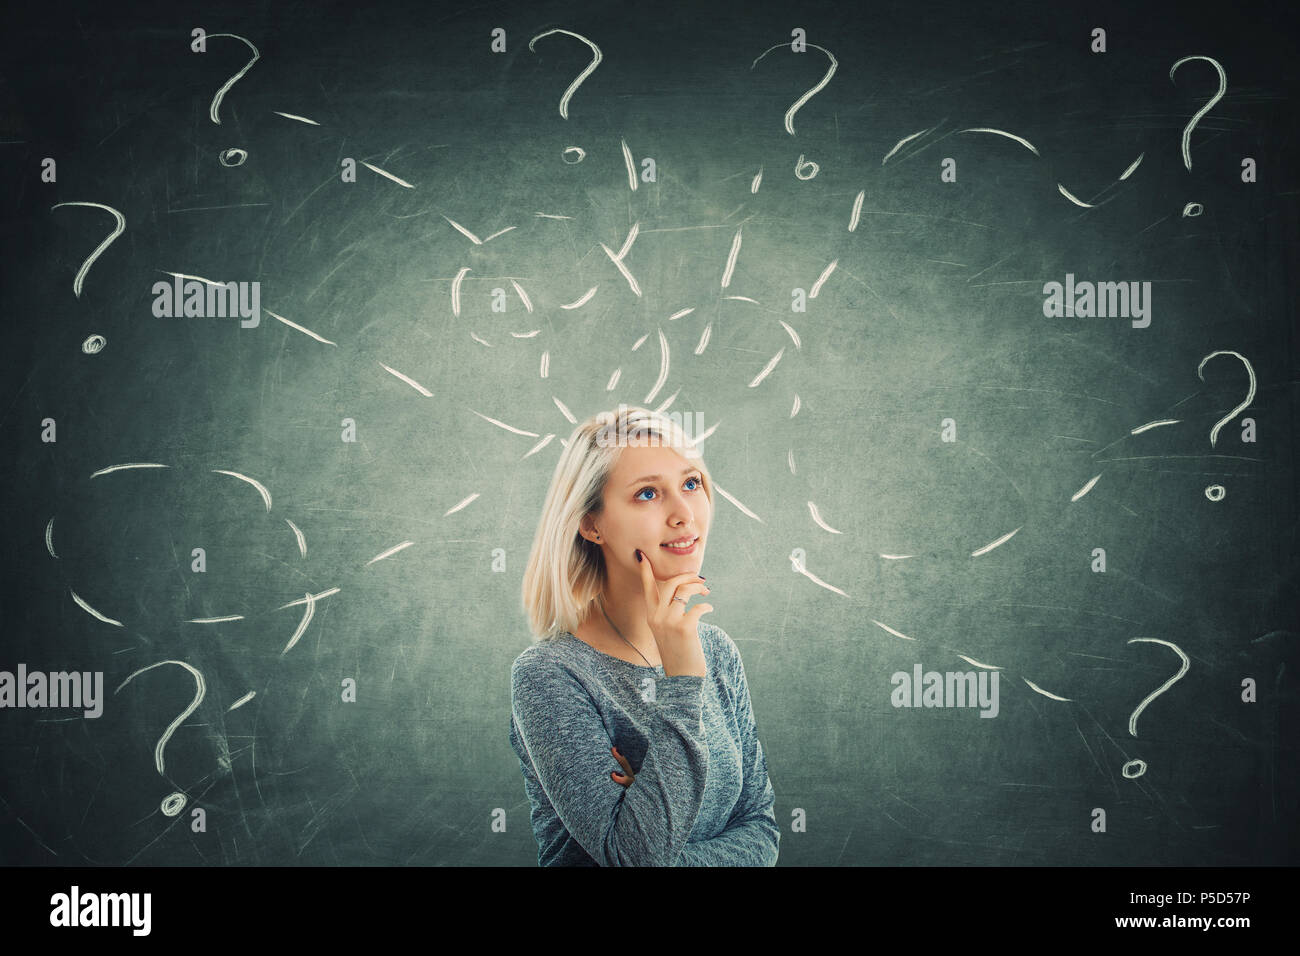 Puzzled young woman in front of a blackboard try to solve different tasks, having a lot of questions. Inspiration concept and self development. Stock Photo